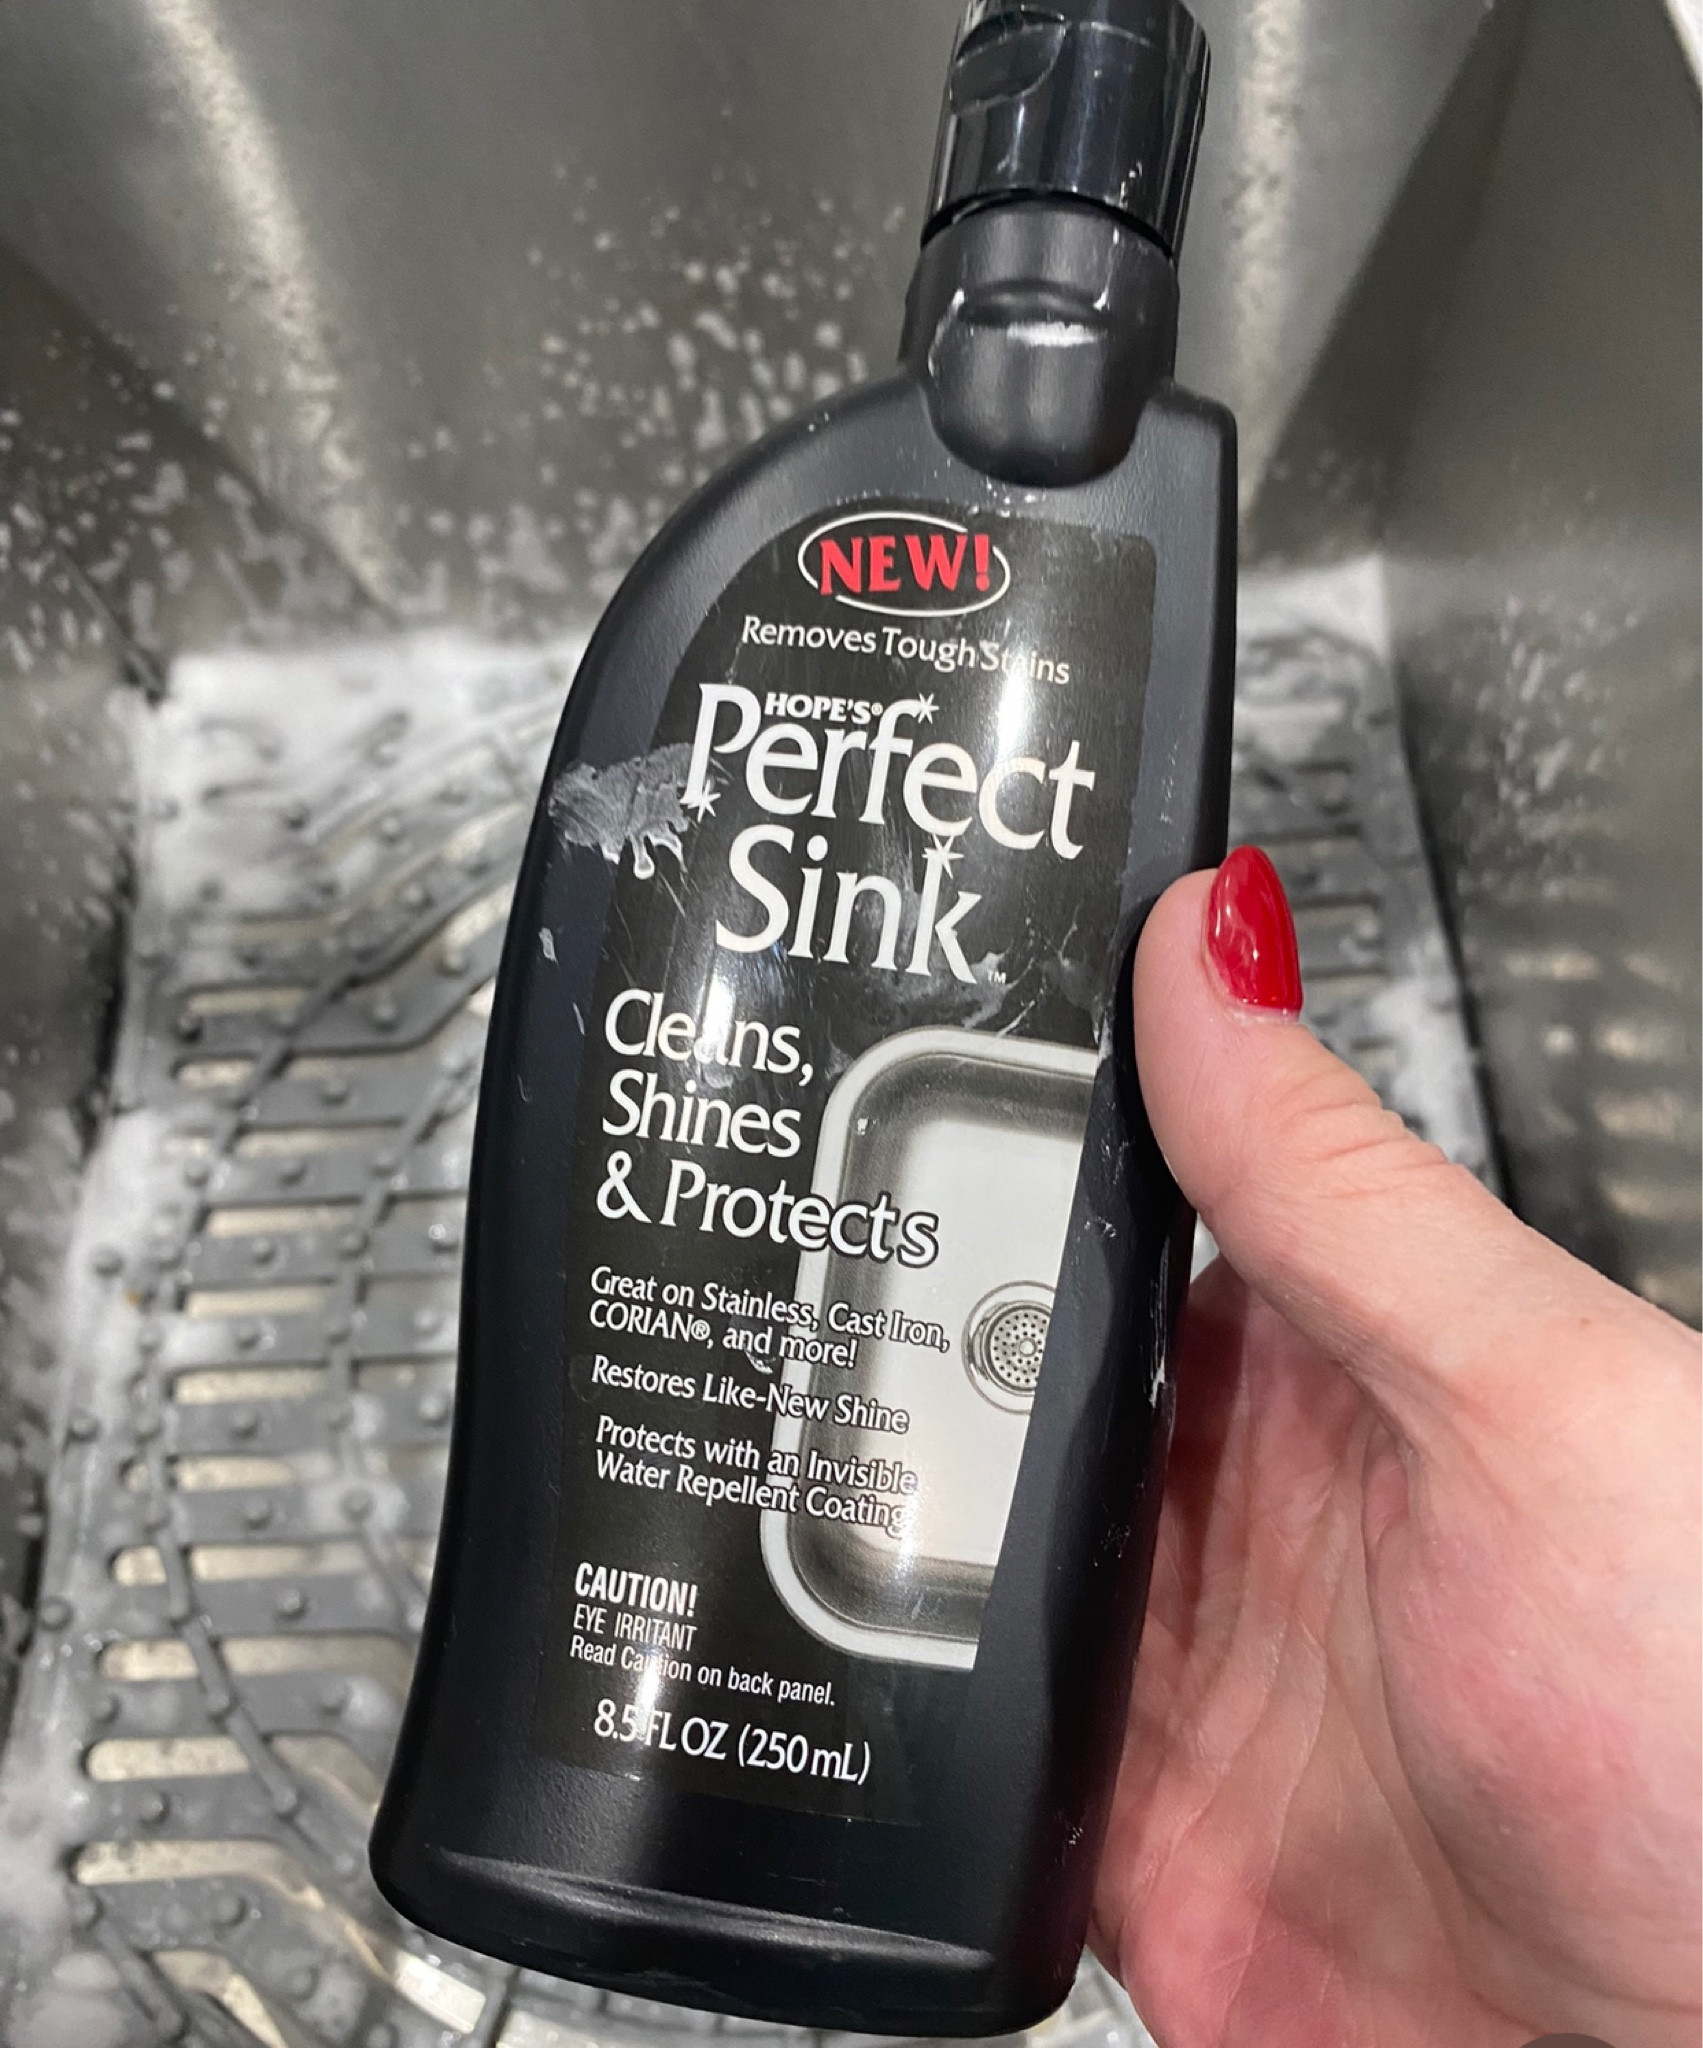 Hope's Perfect Sink Cleaner and Polish, Restorative, Removes